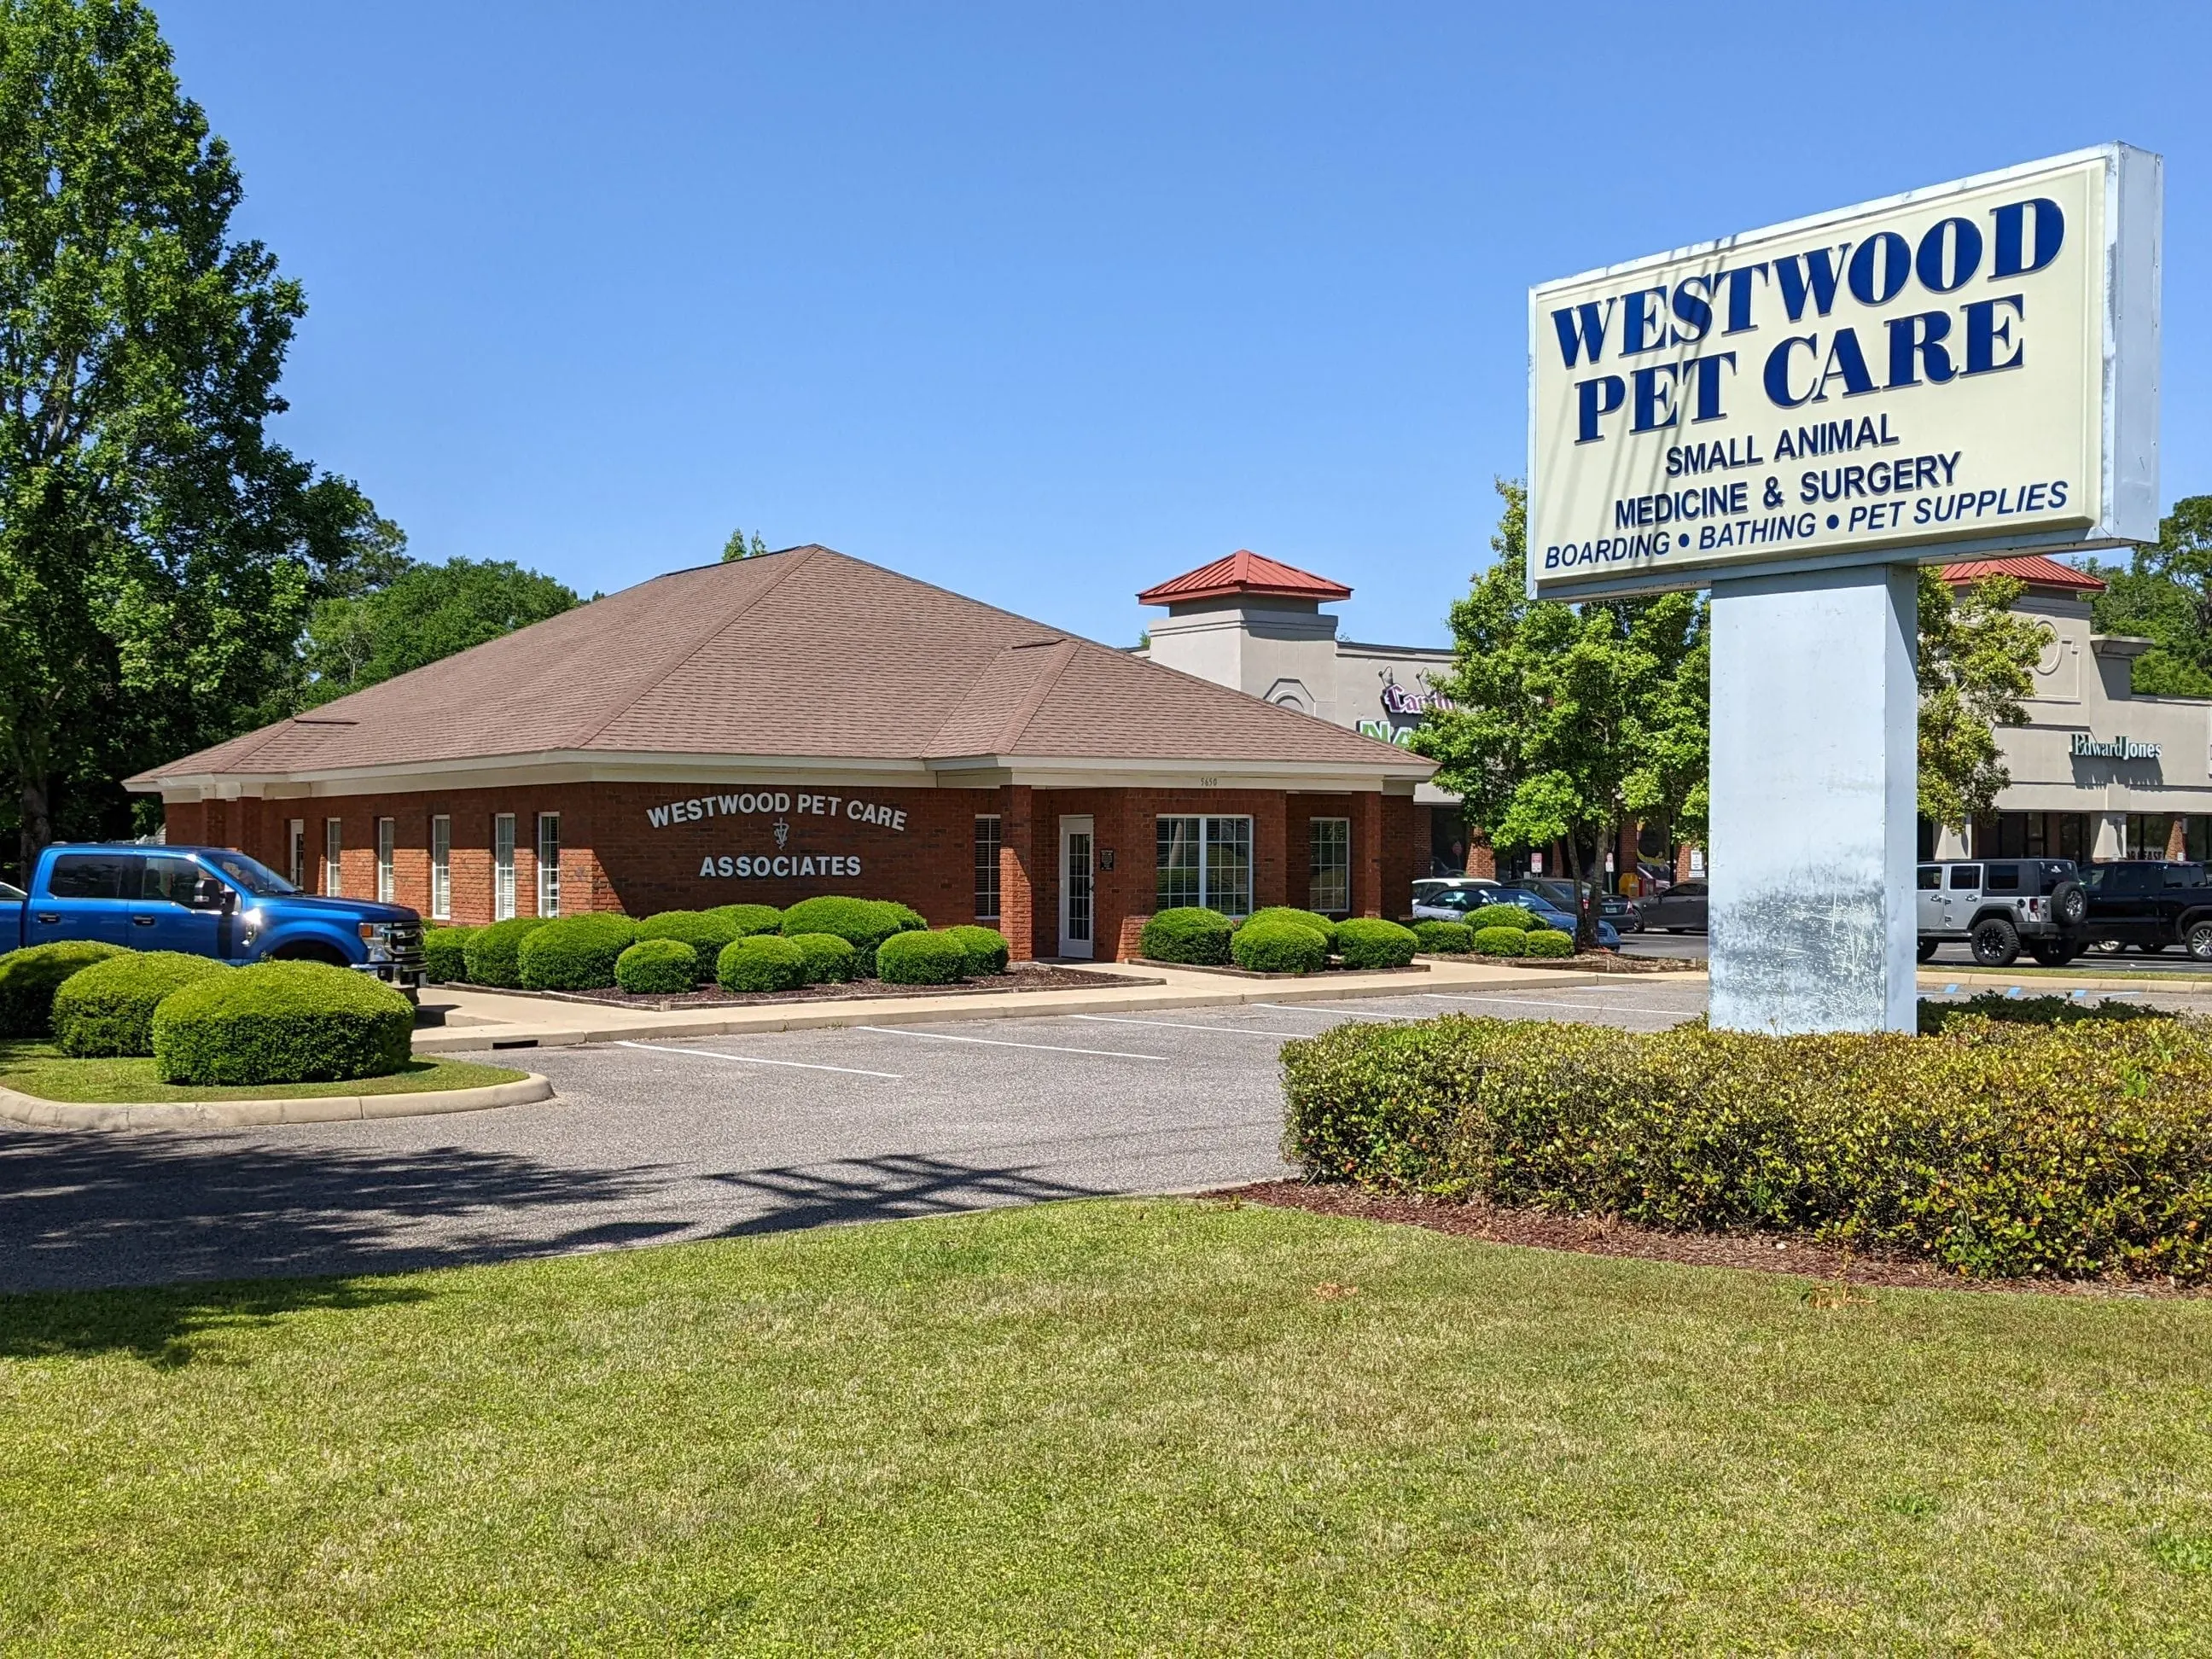 Welcome to Westwood Pet Care!